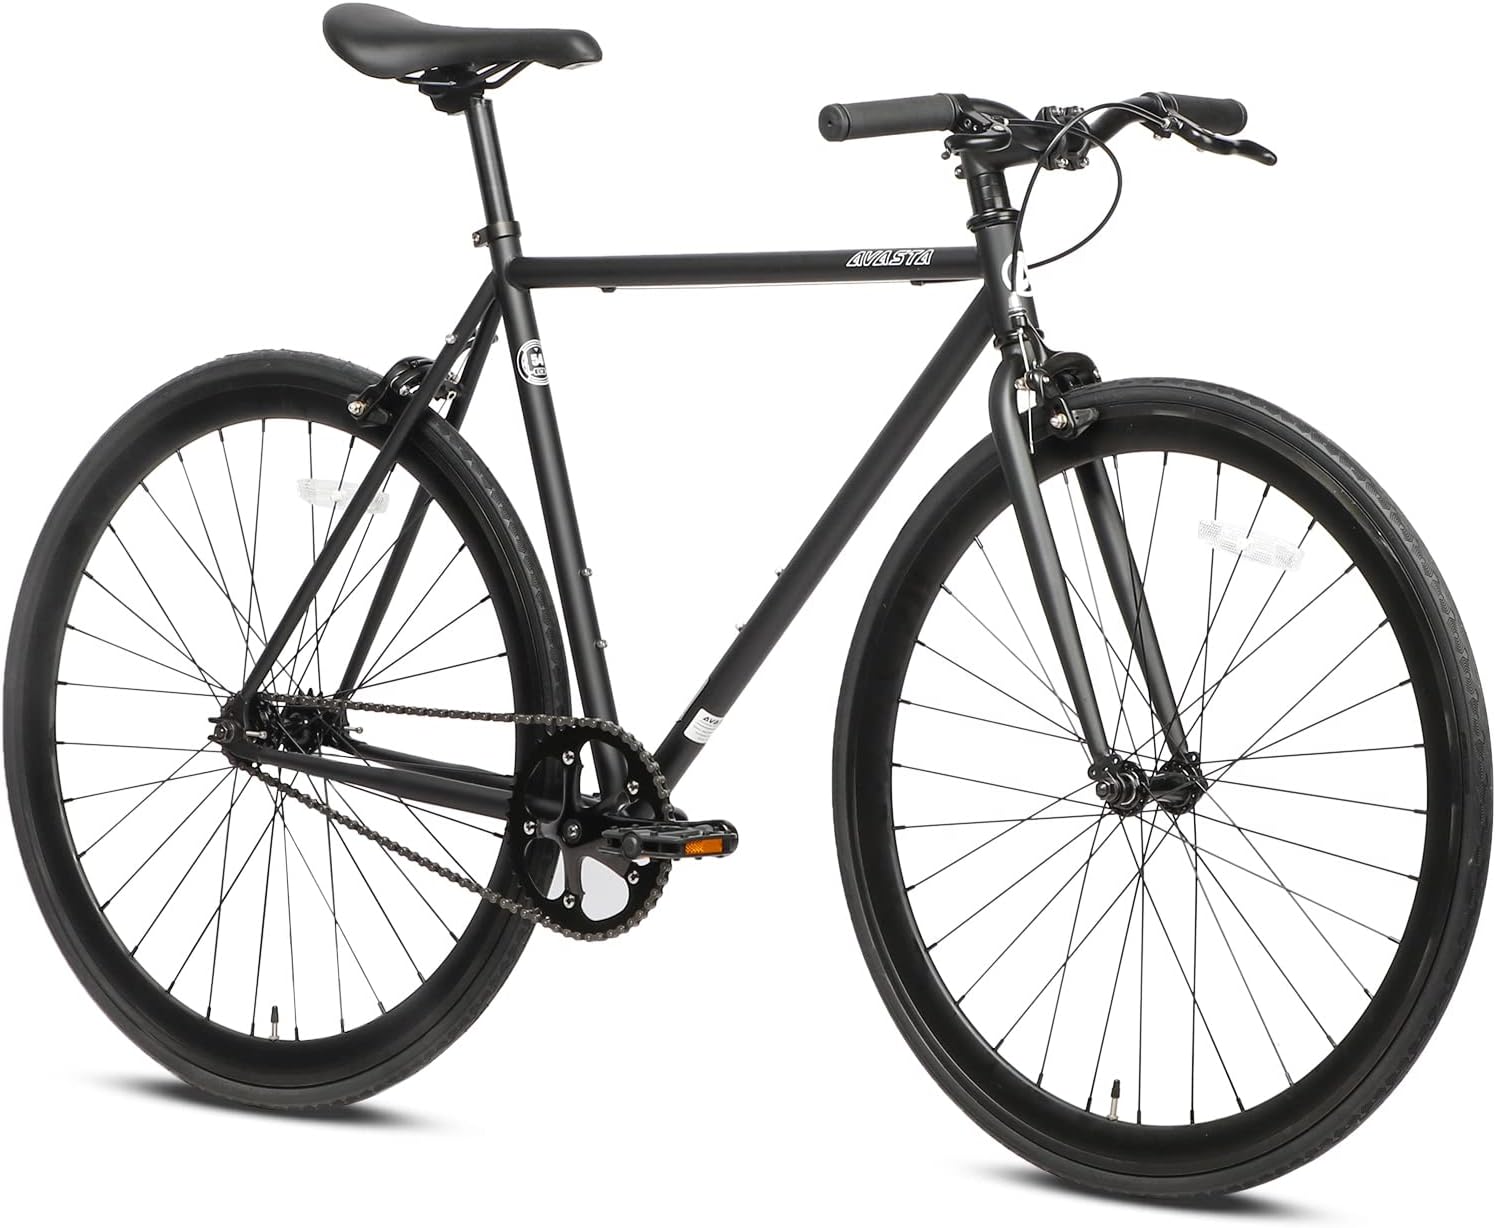 selection of commuter bikes in different colors and styles